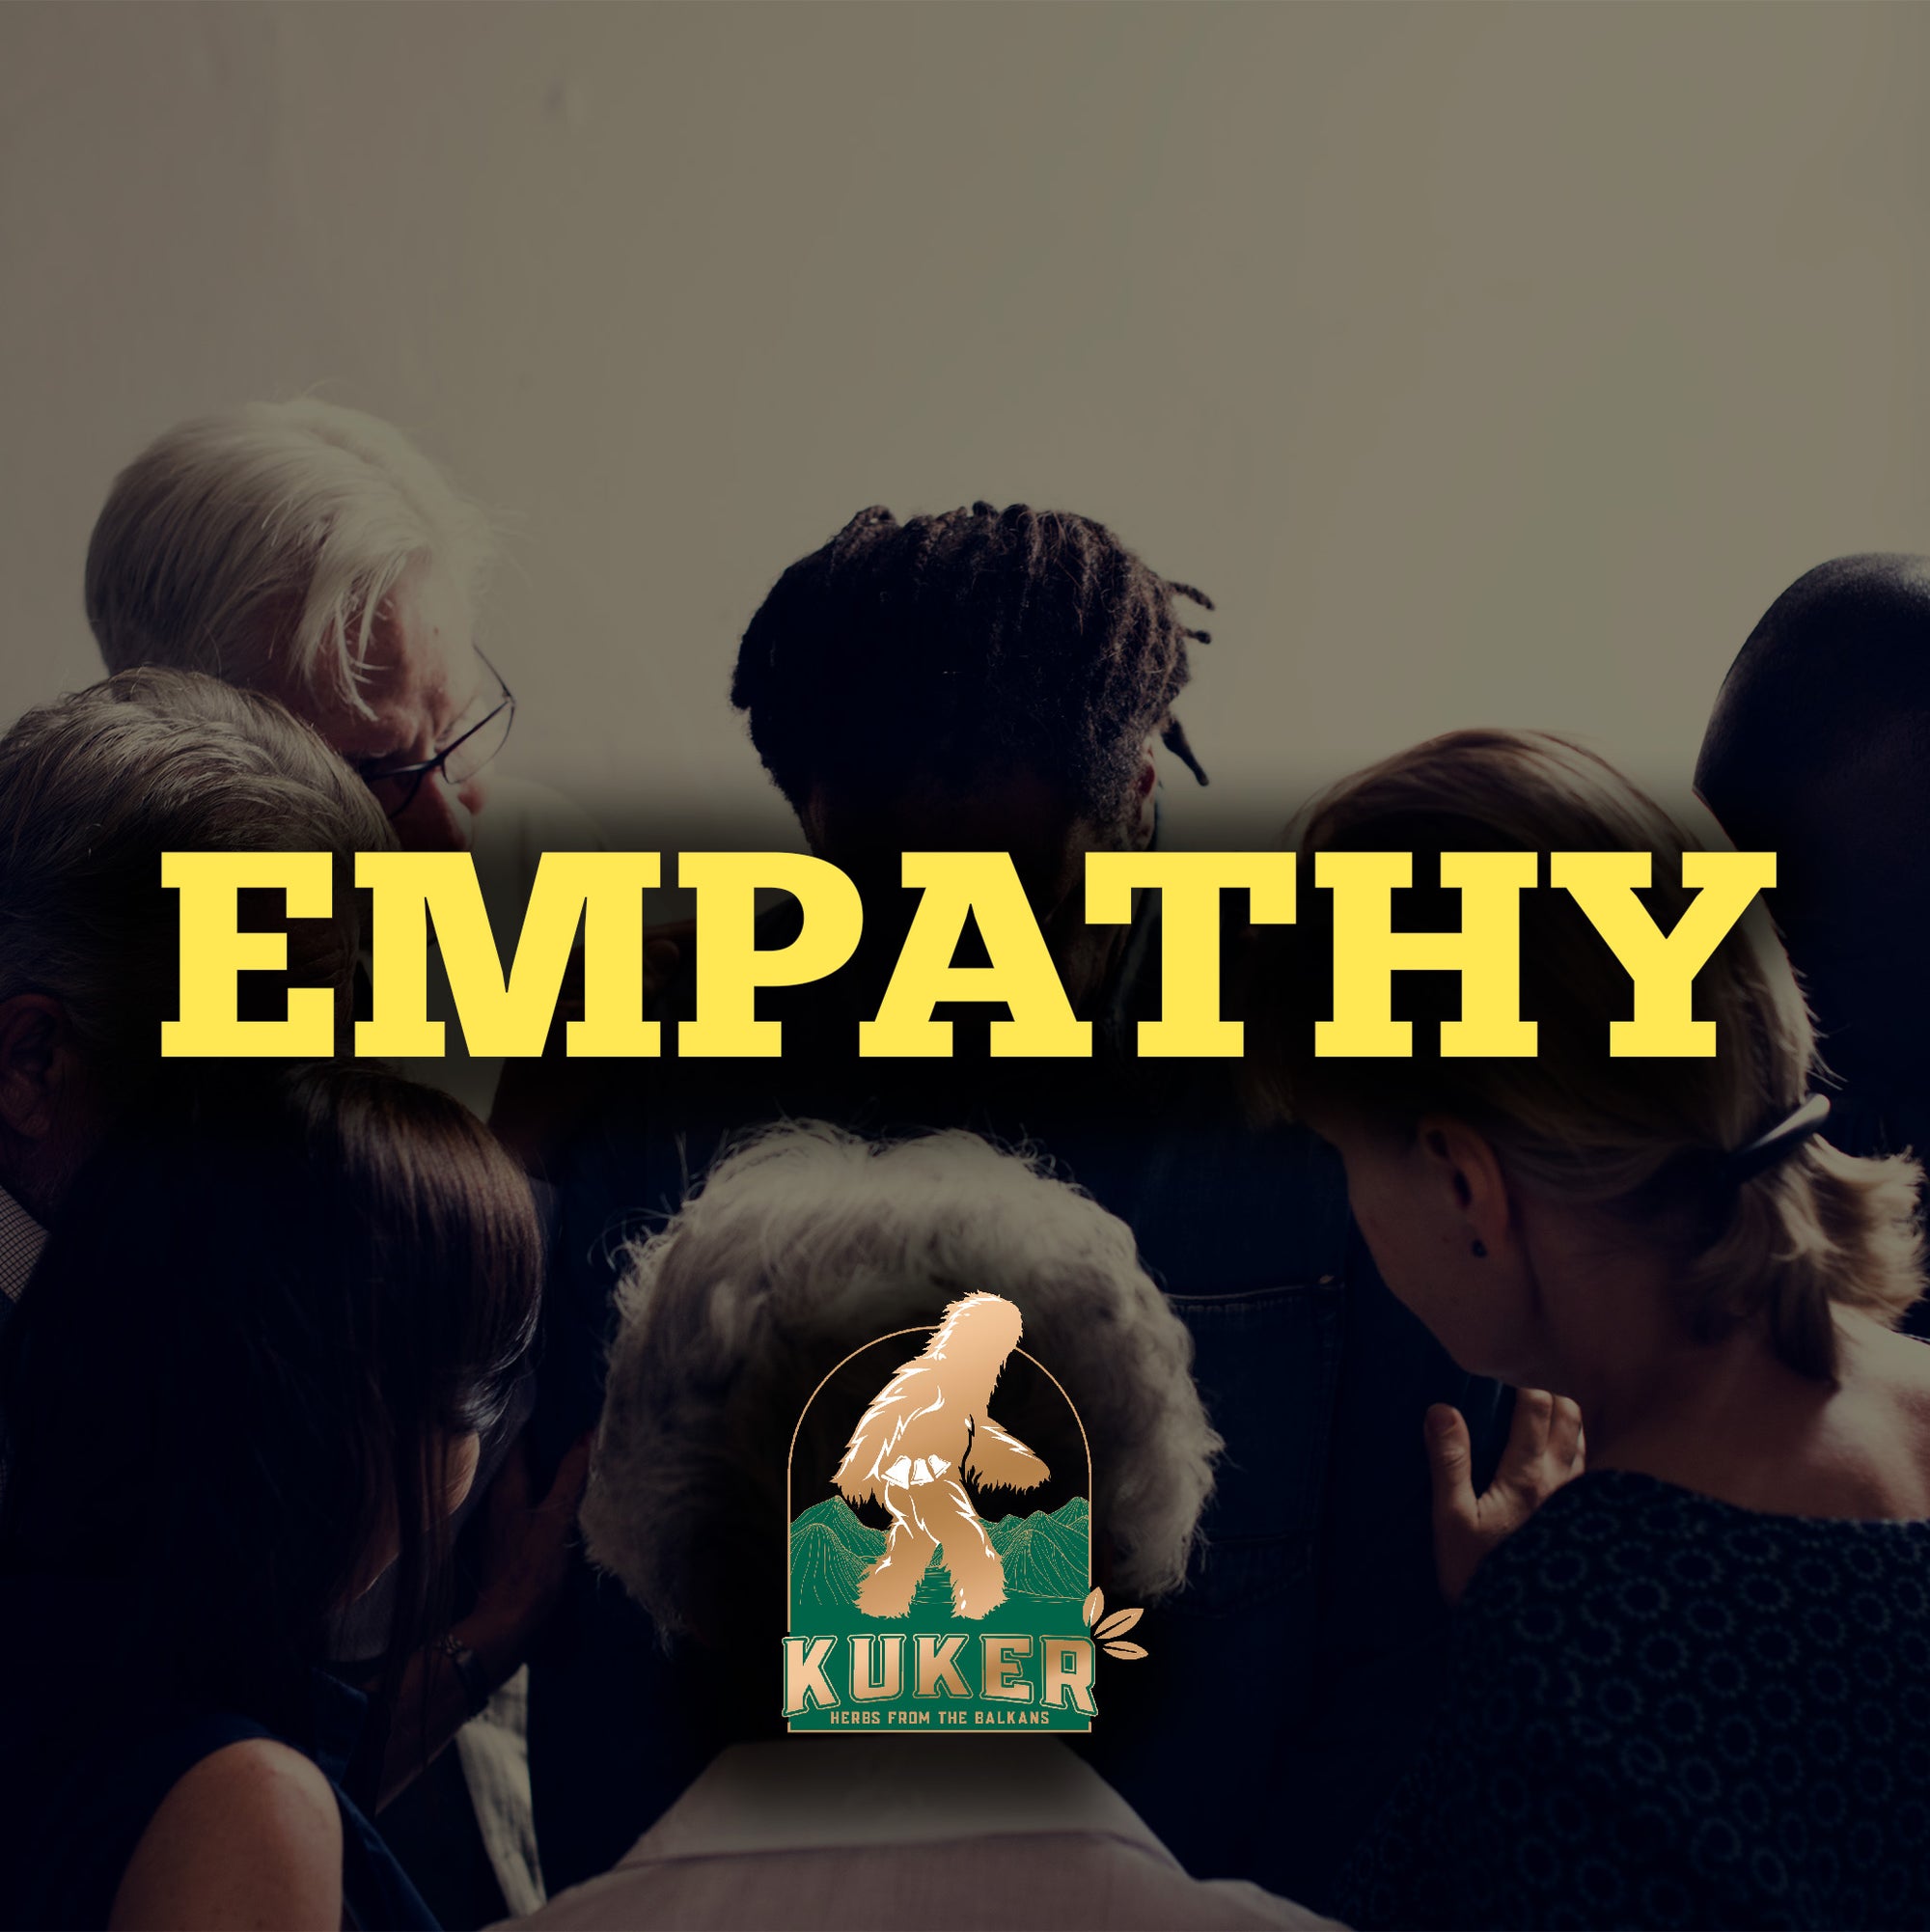 Empathy | It can be transmitted socially